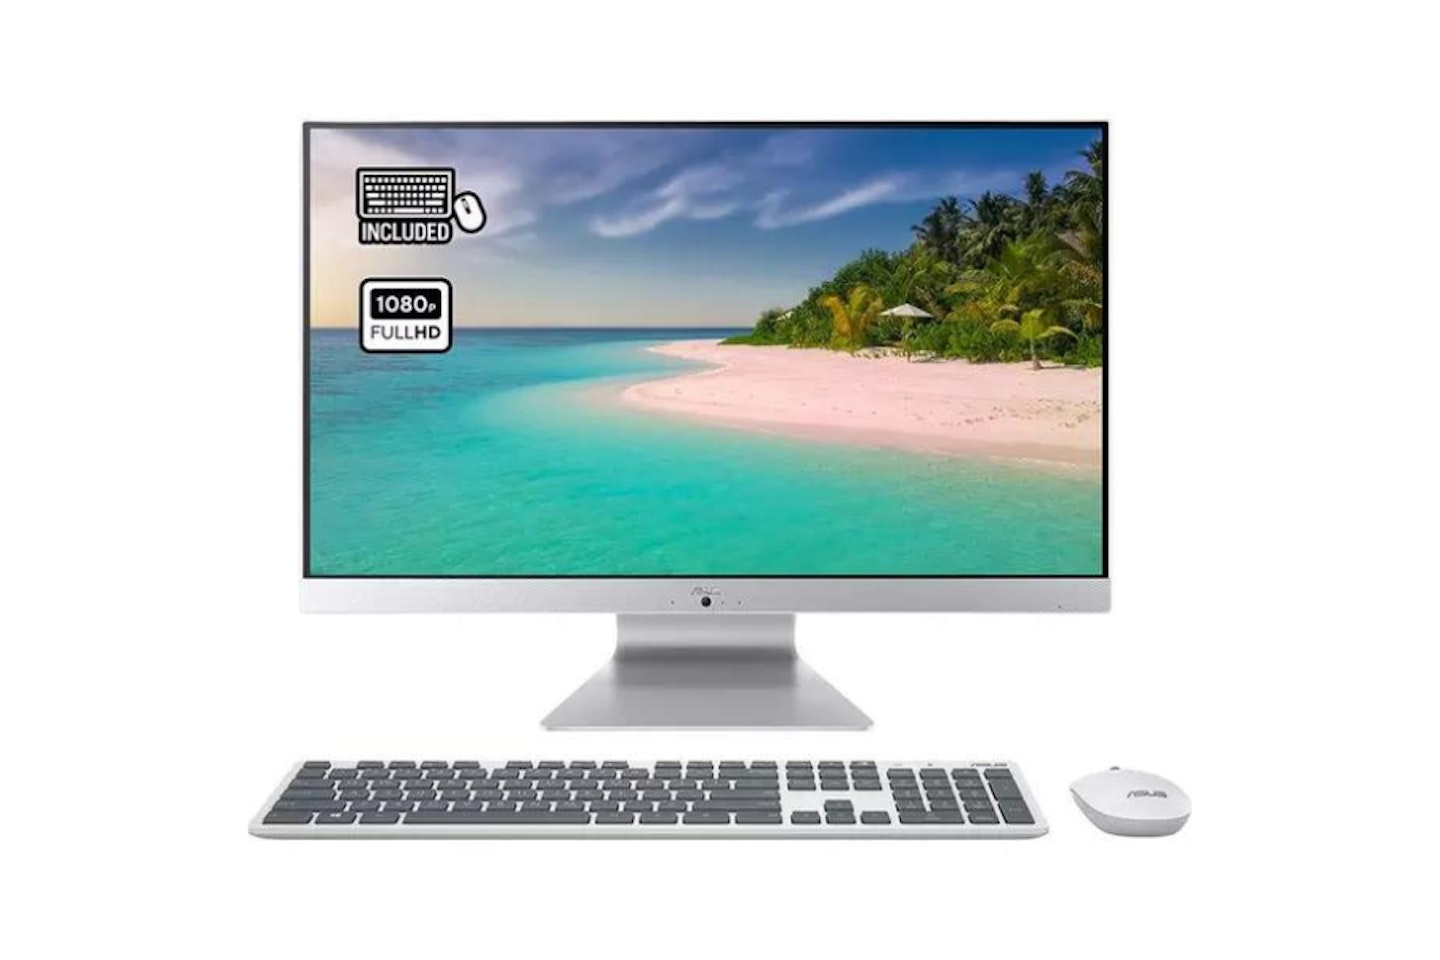 ASUS M3700 27" All-in-One PC